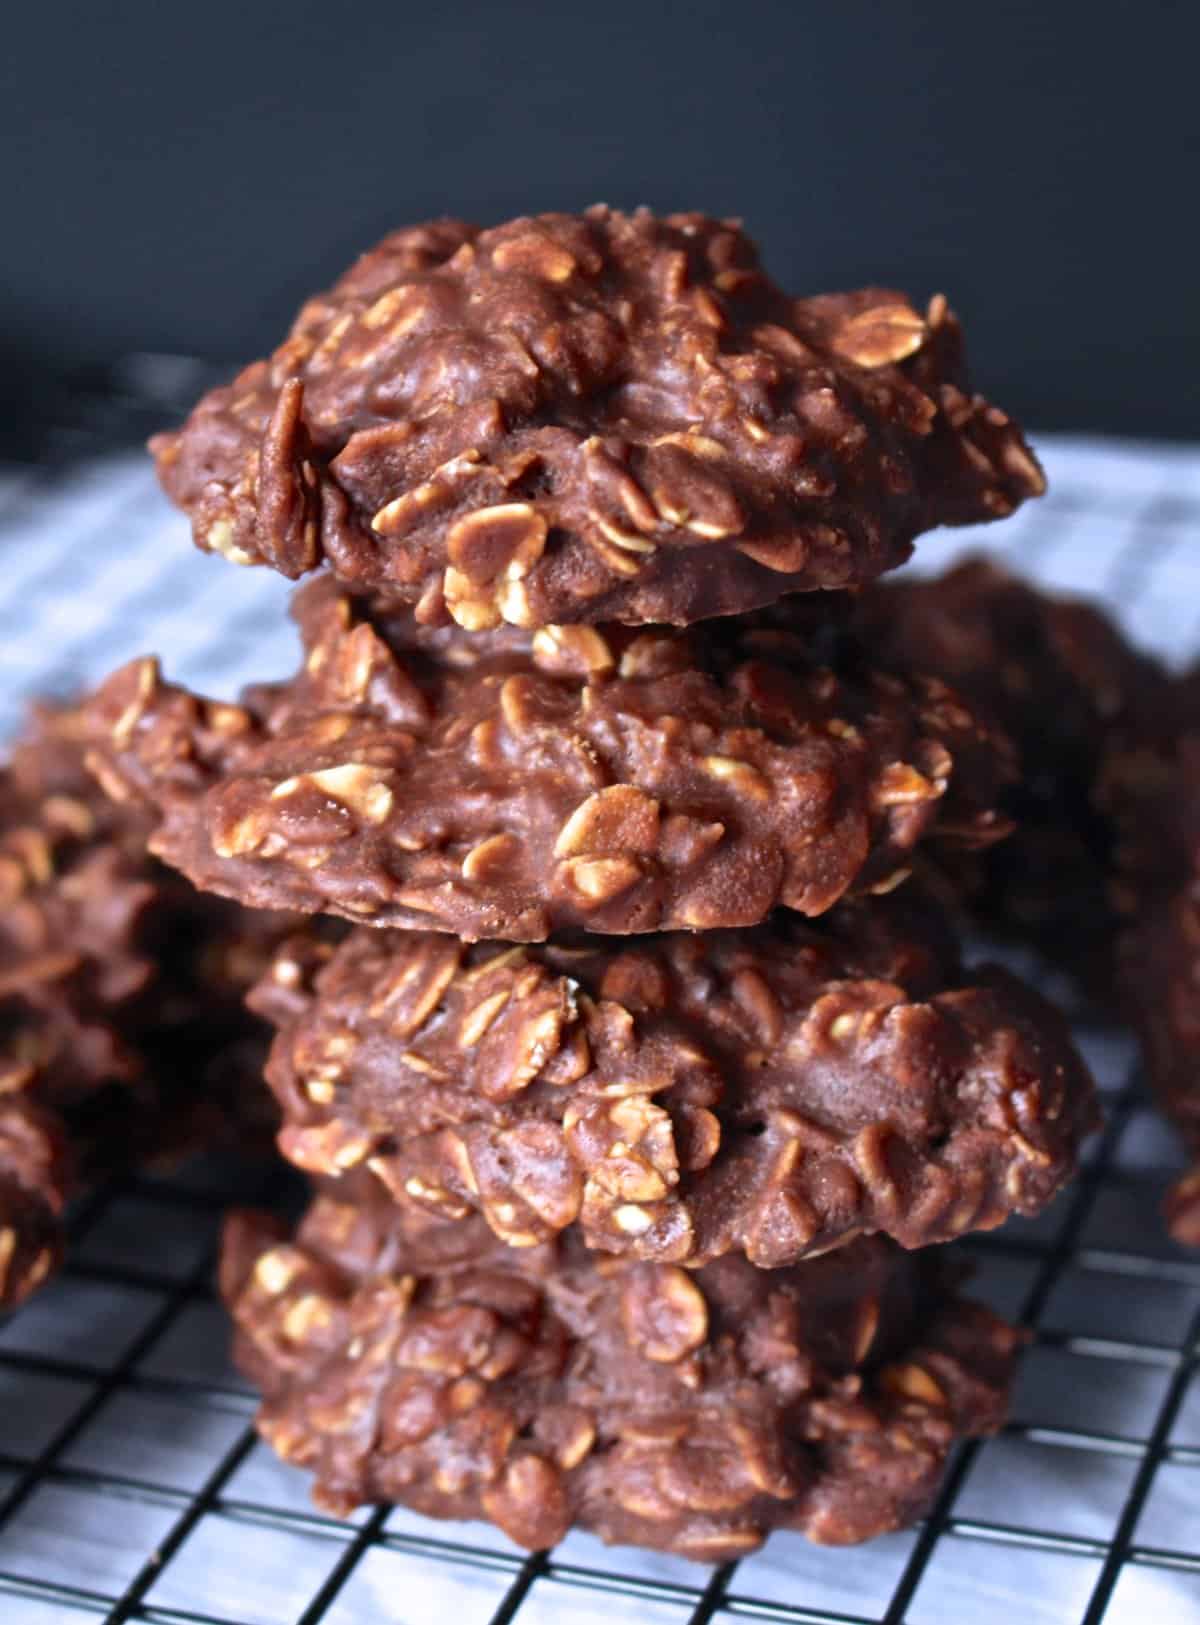 Chocolate Peanut Butter No-Bakes - Real Food with Jessica